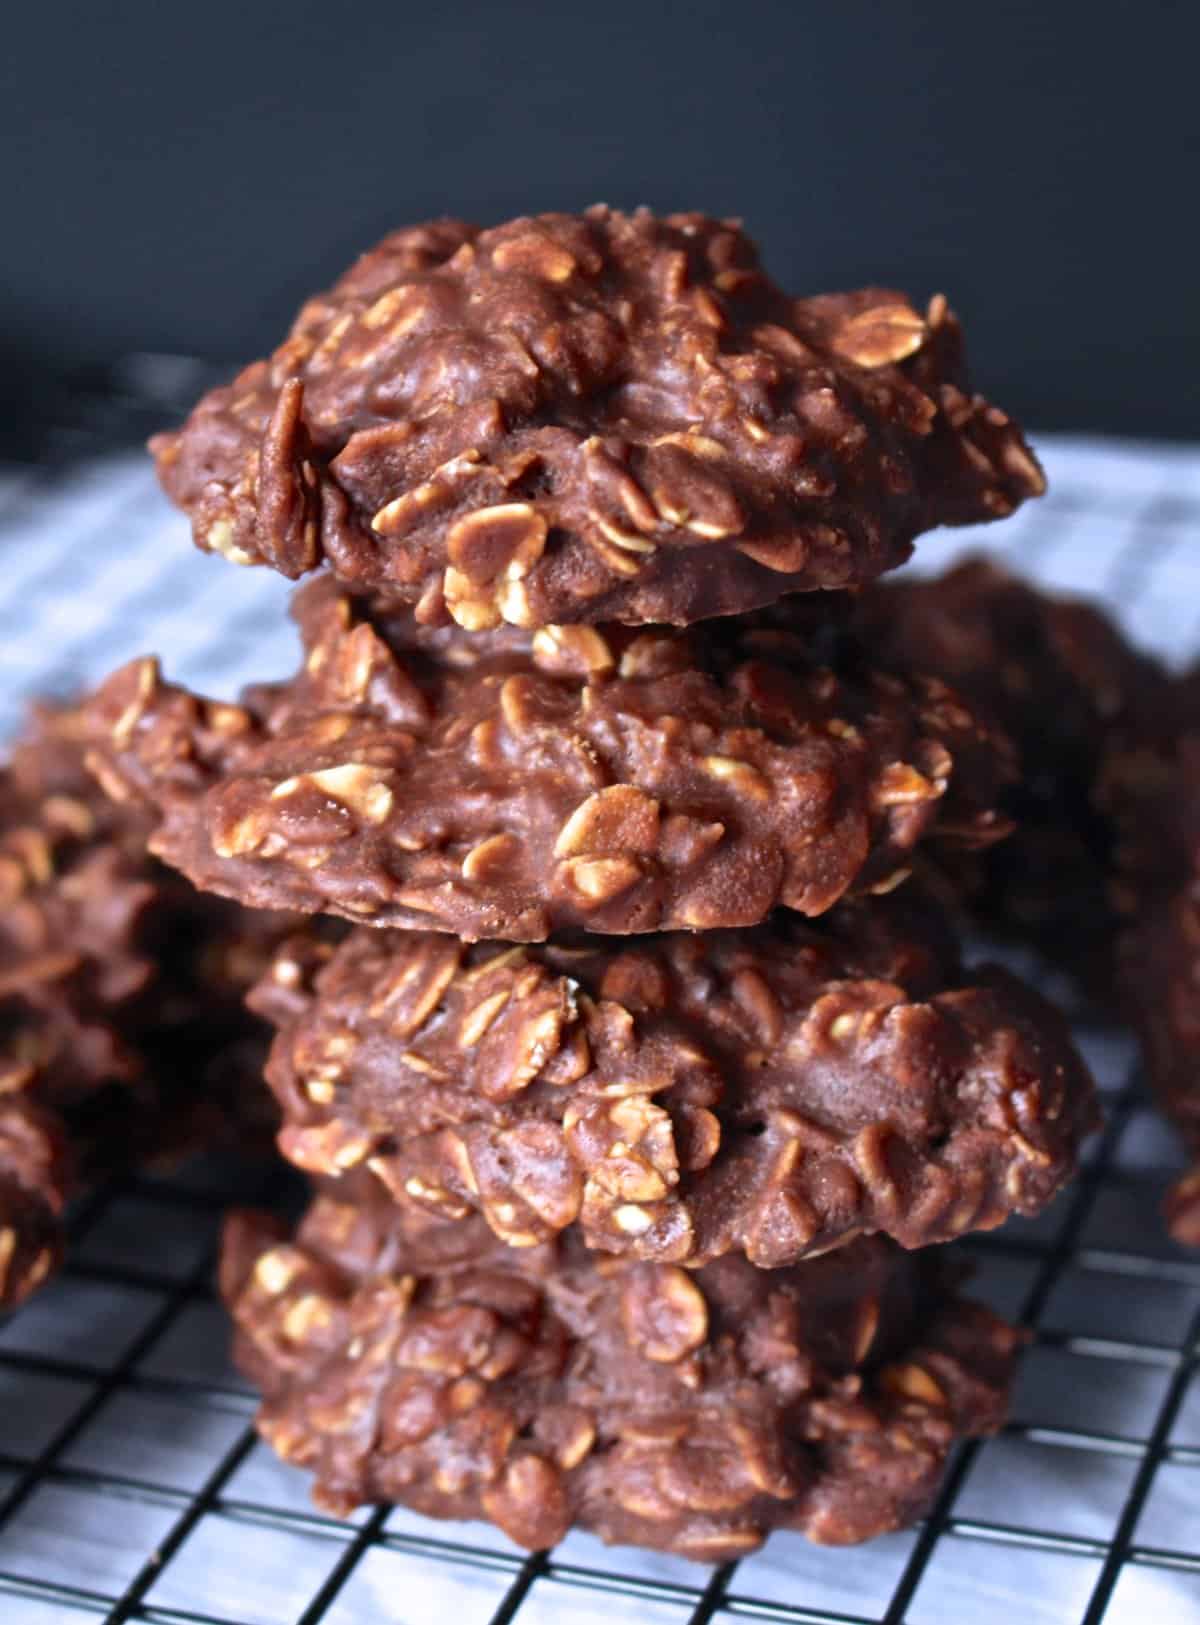 Chocolate Peanut Butter No-Bakes - Real Food with Jessica